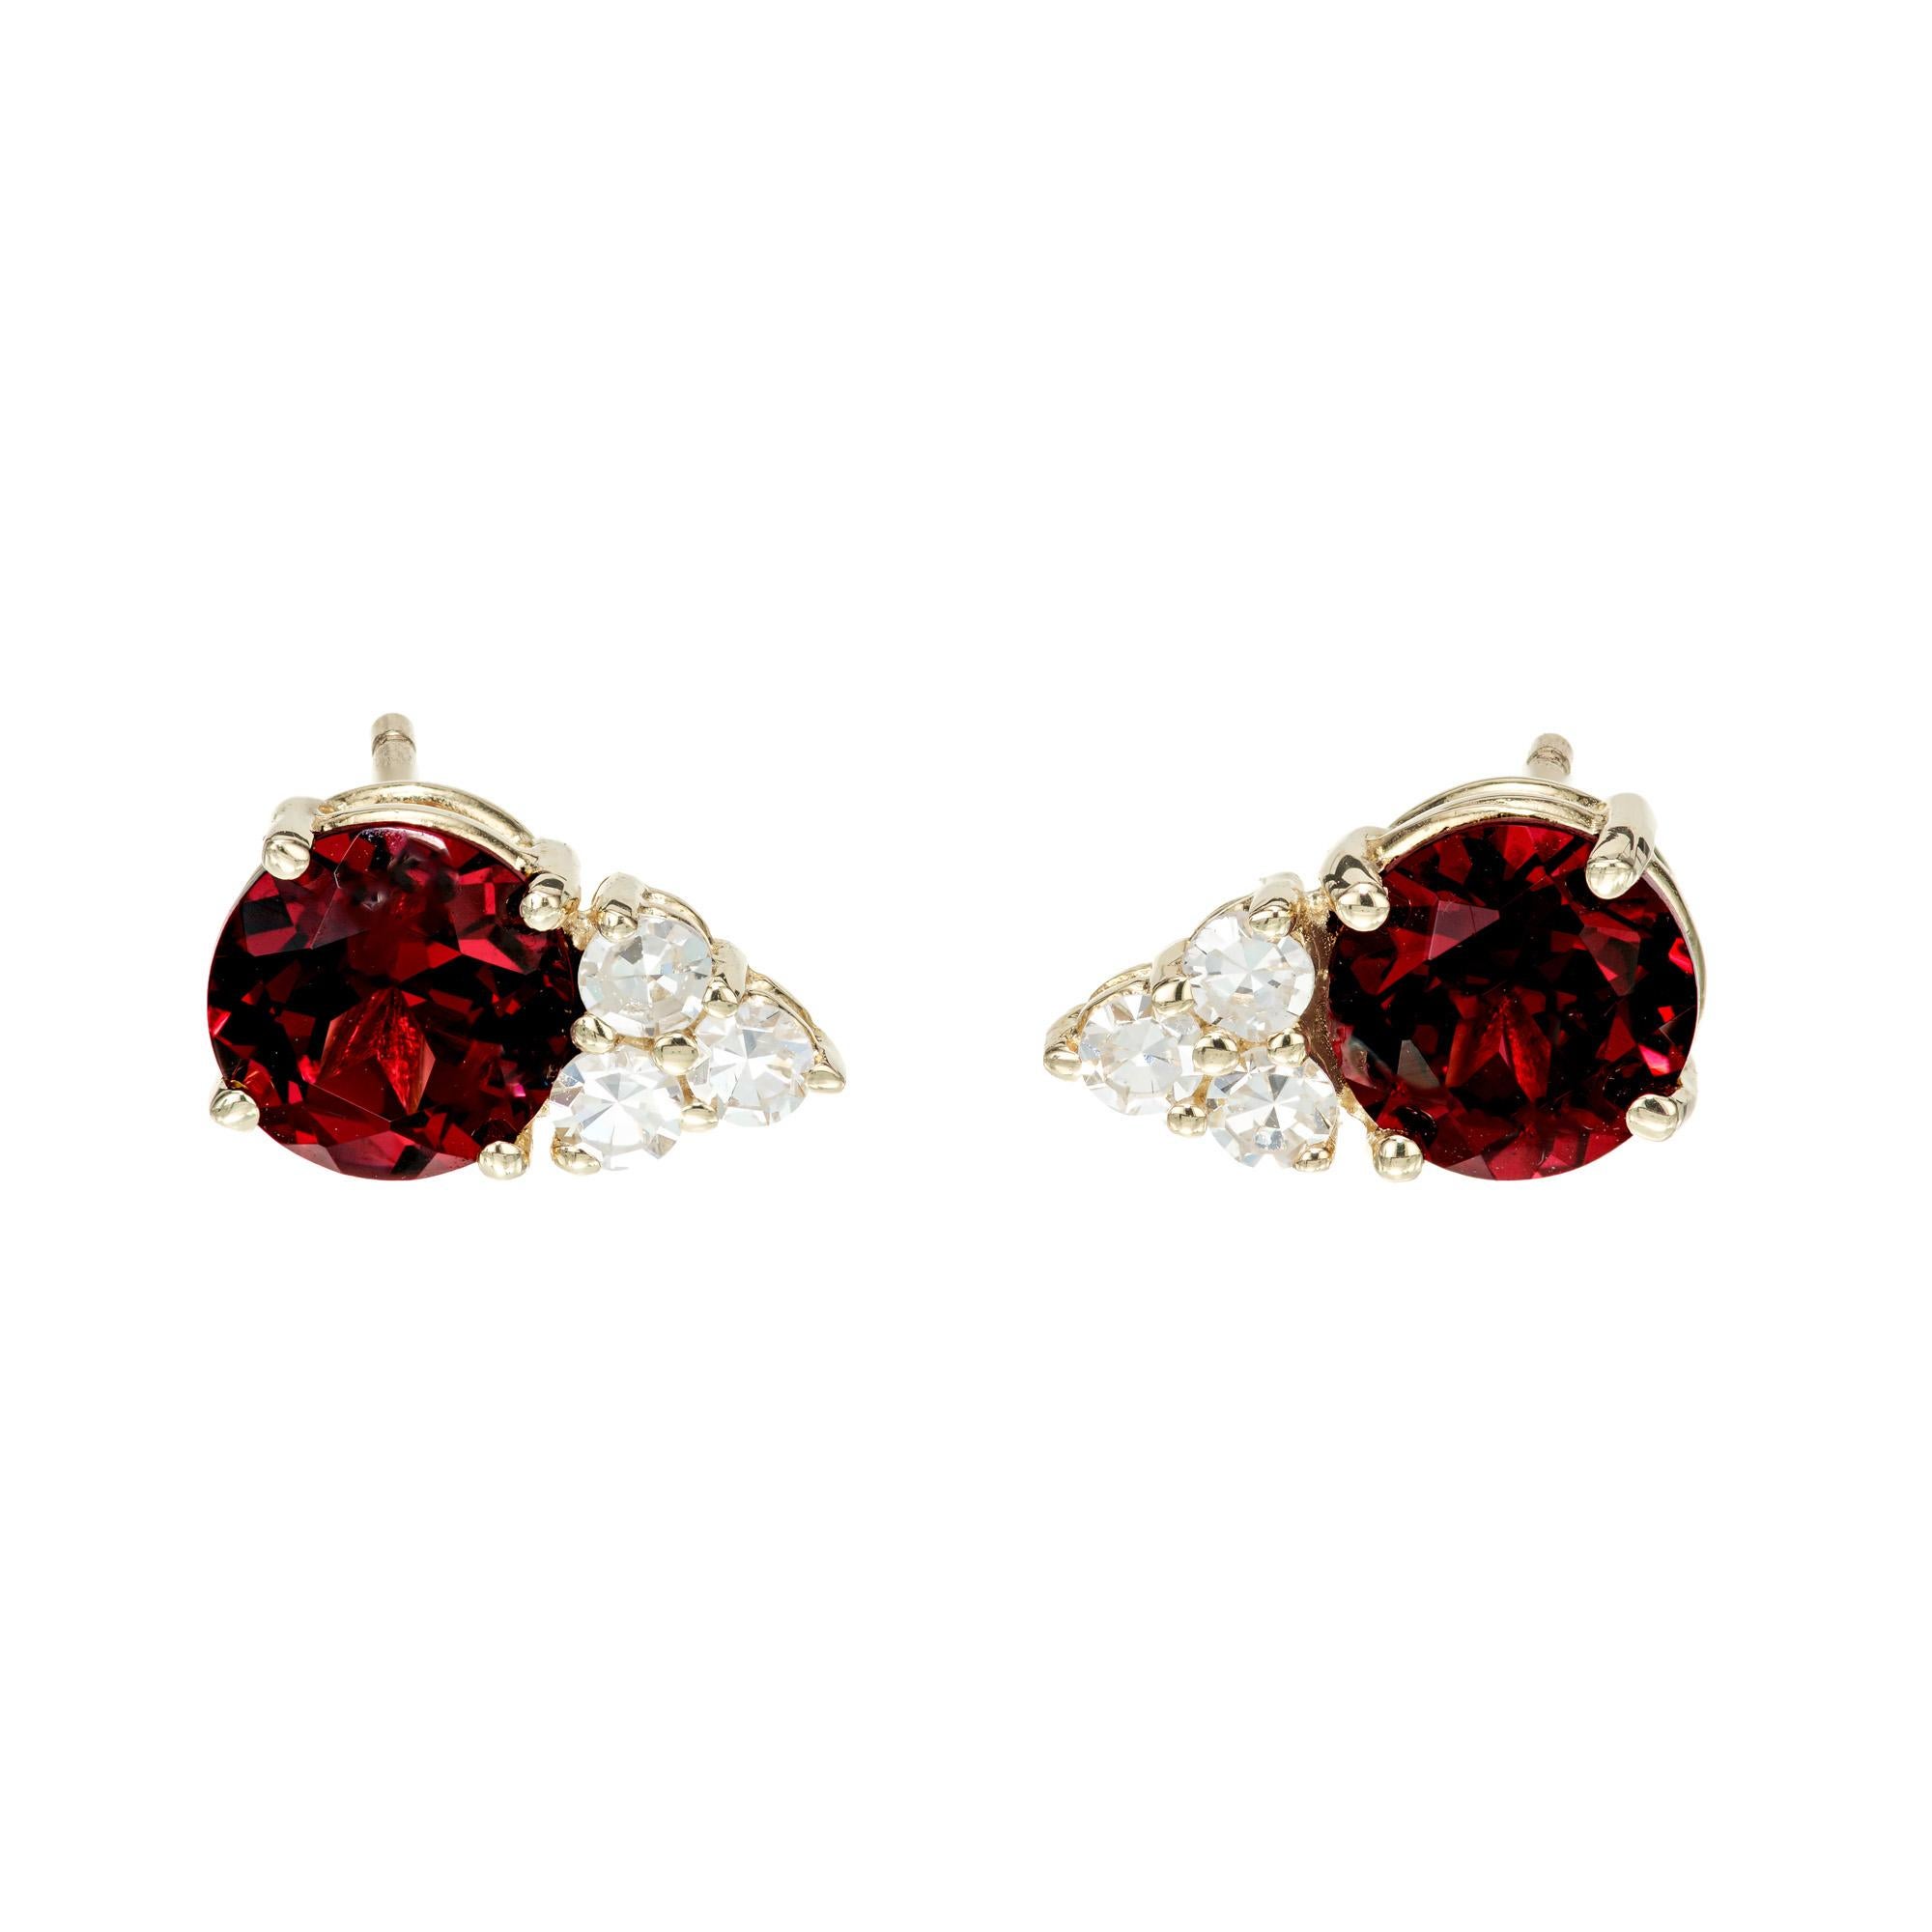 Rhodolite garnet earrings with brightly colored diamond accents. 2 round brownish red rhodolite garnets set in 14k yellow gold settings, each with 3 round brilliant cut diamonds.  Designed and crafted in the Peter Suchy workshop.

2 round brownish